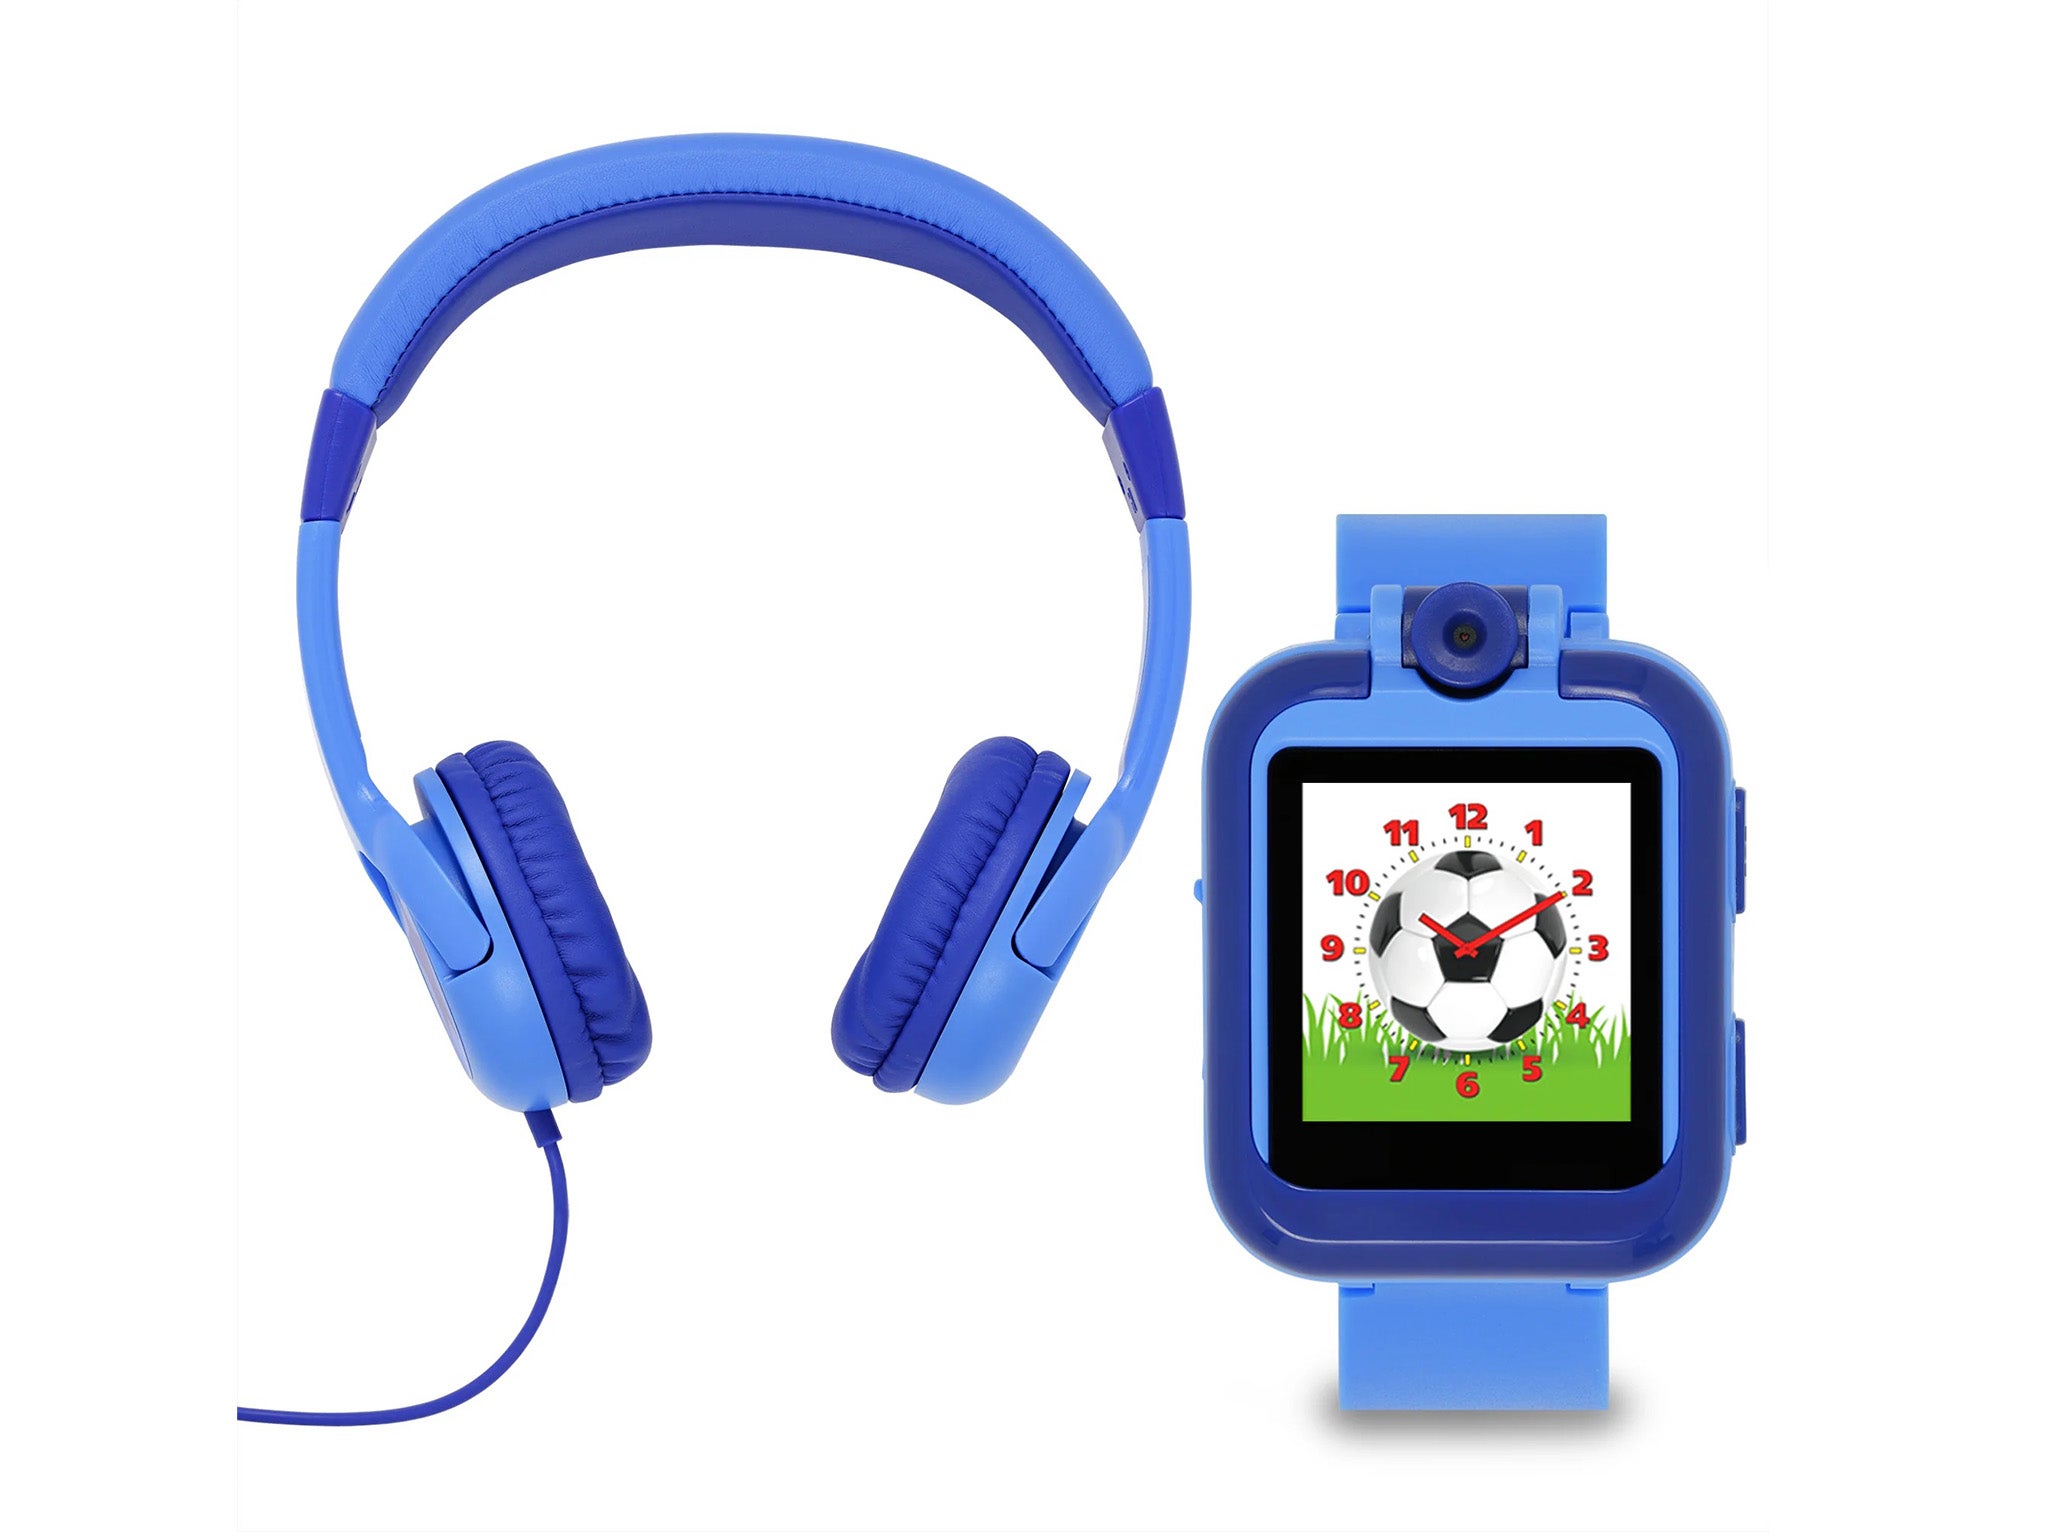 Tikkers plain blue interactive watch and headphone set